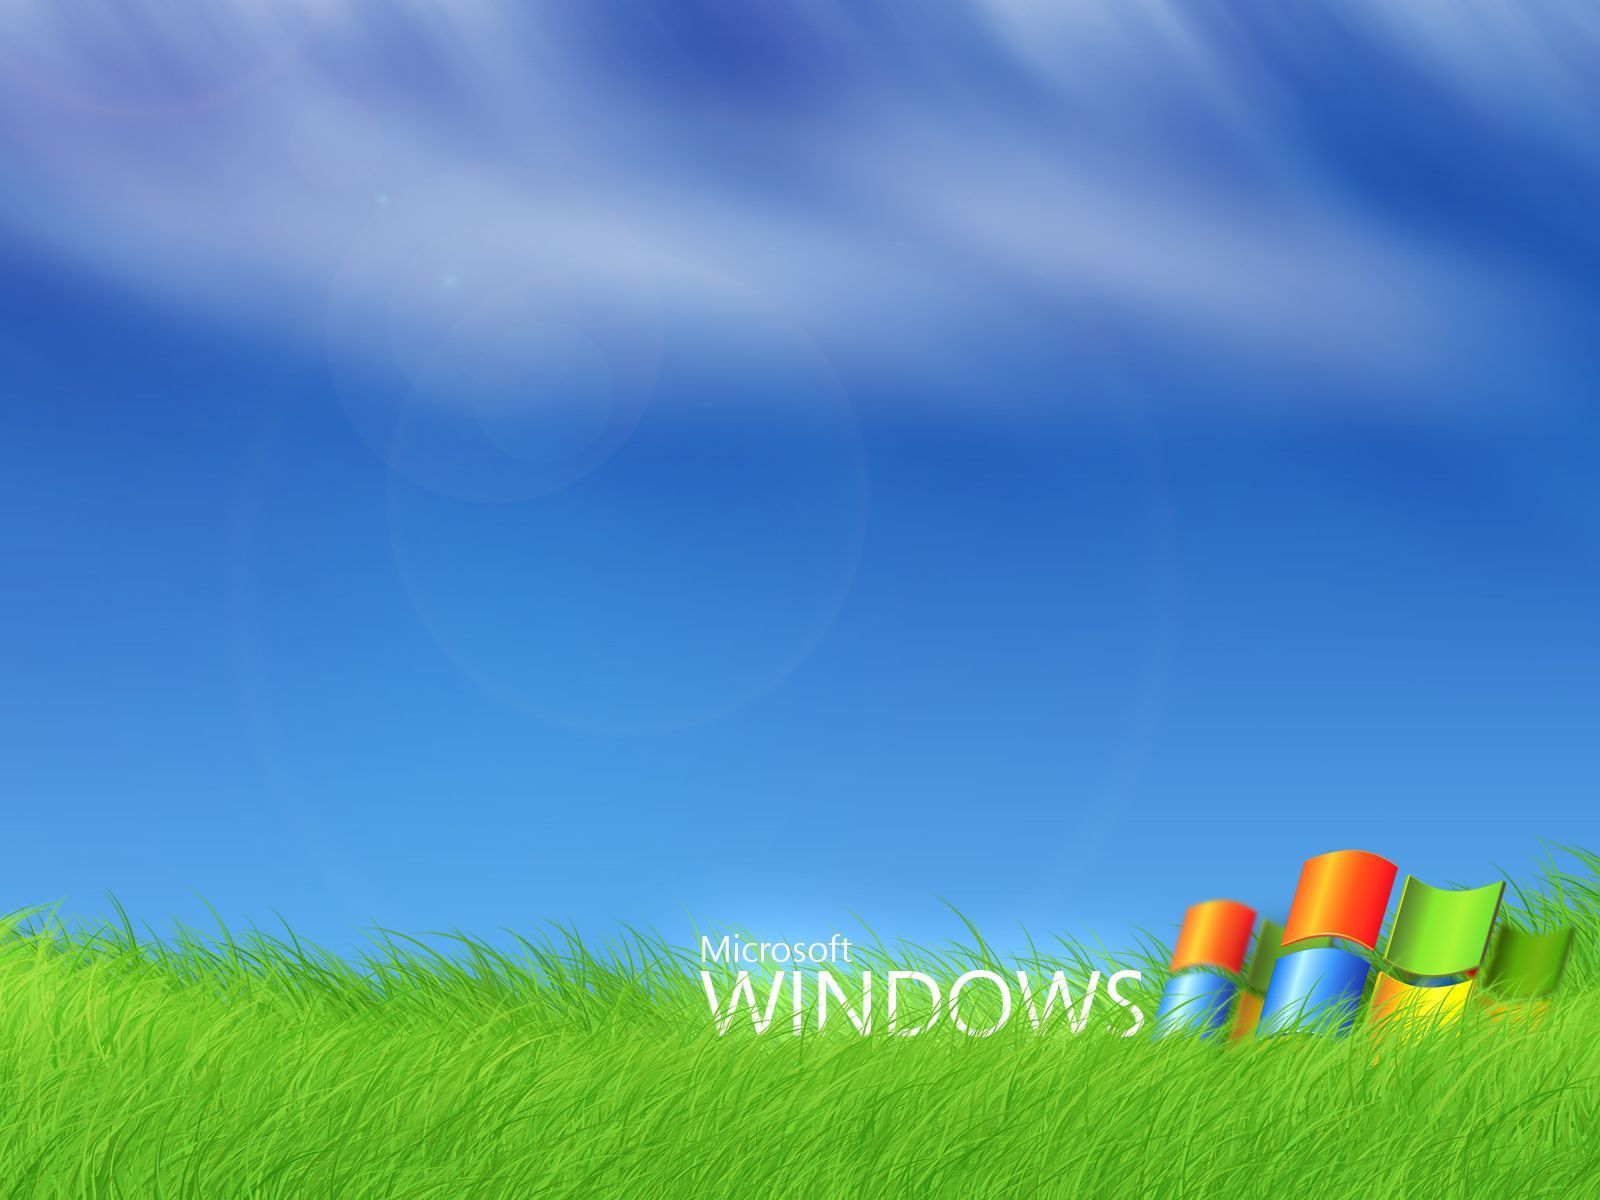 Microsoft Windows Wallpapers HD Backgrounds